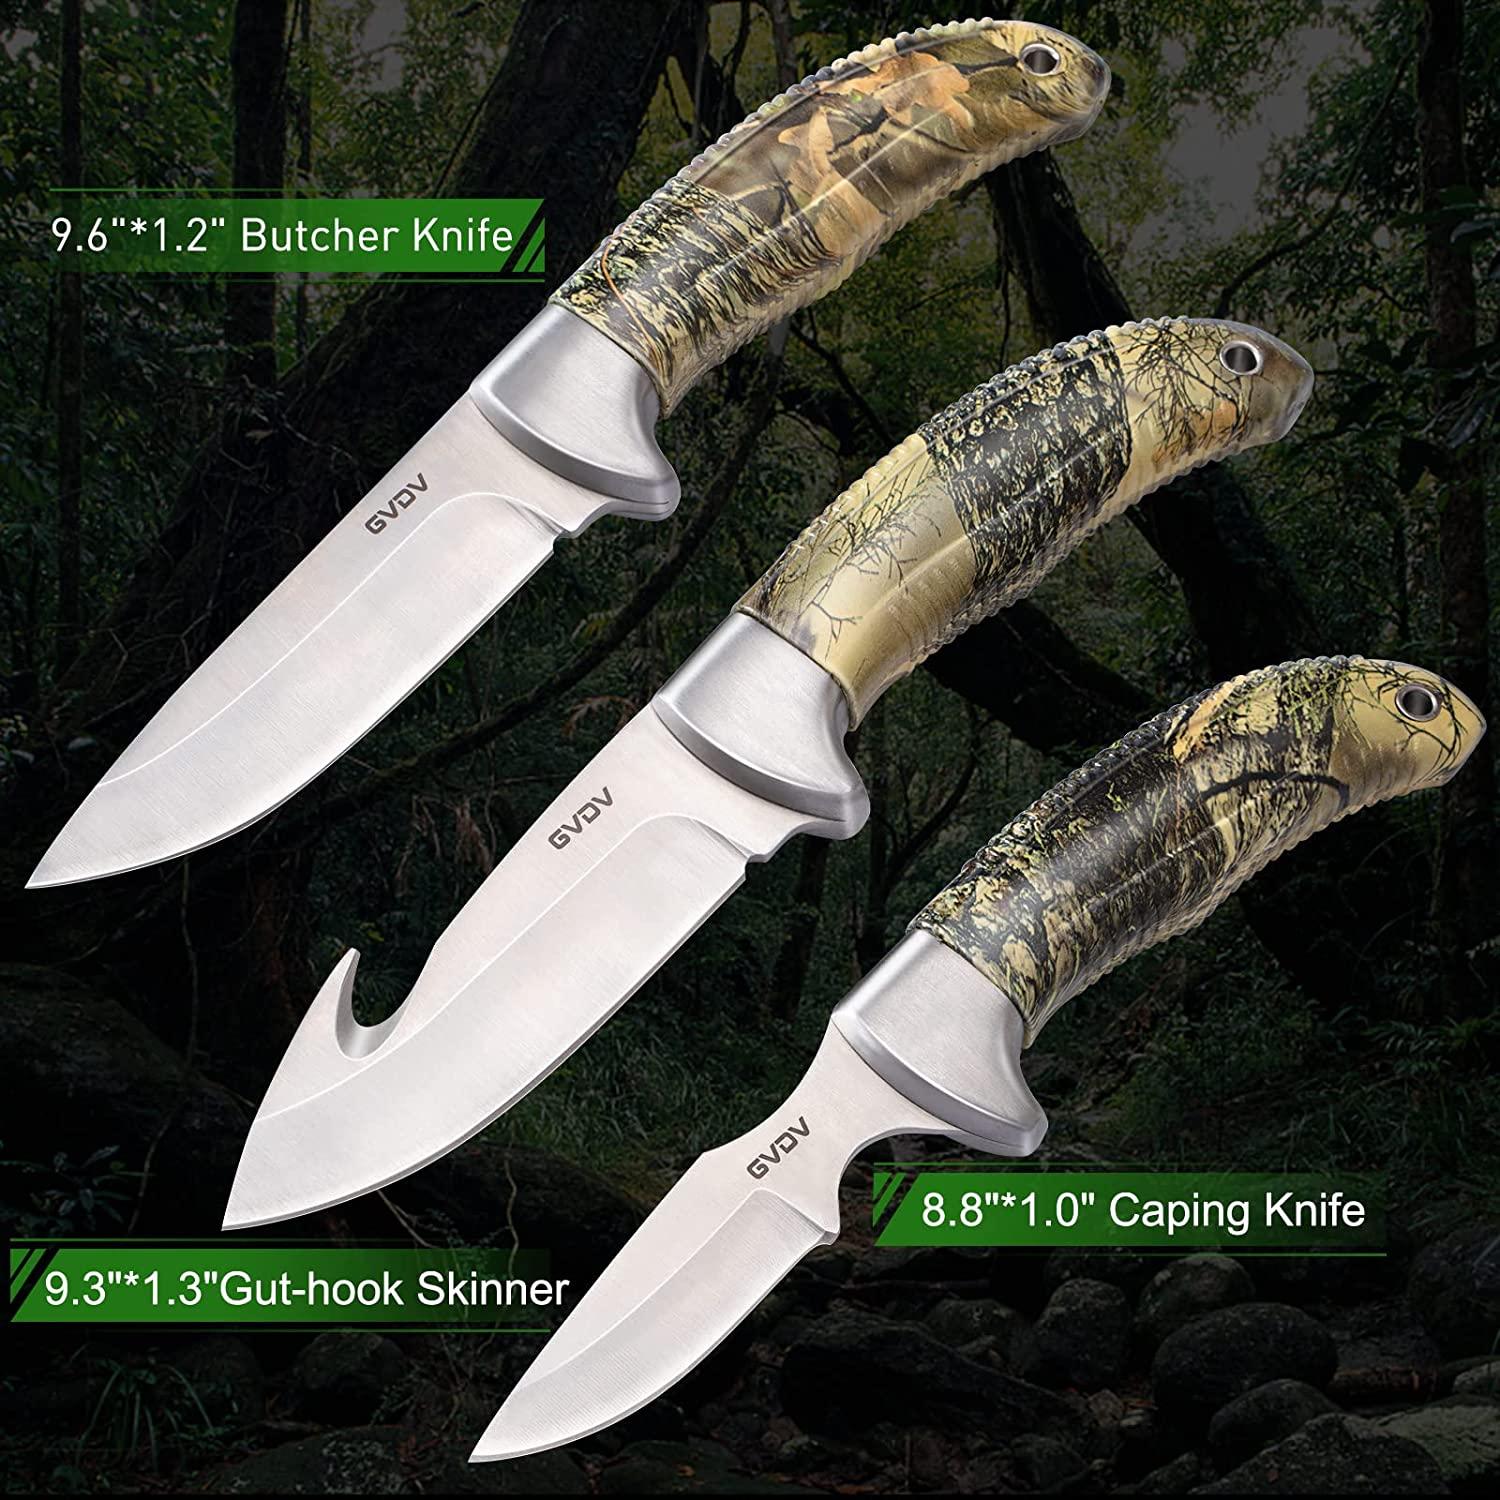 GVDV Hunting Knife Set, Field Dressing Gear Accessories Set for